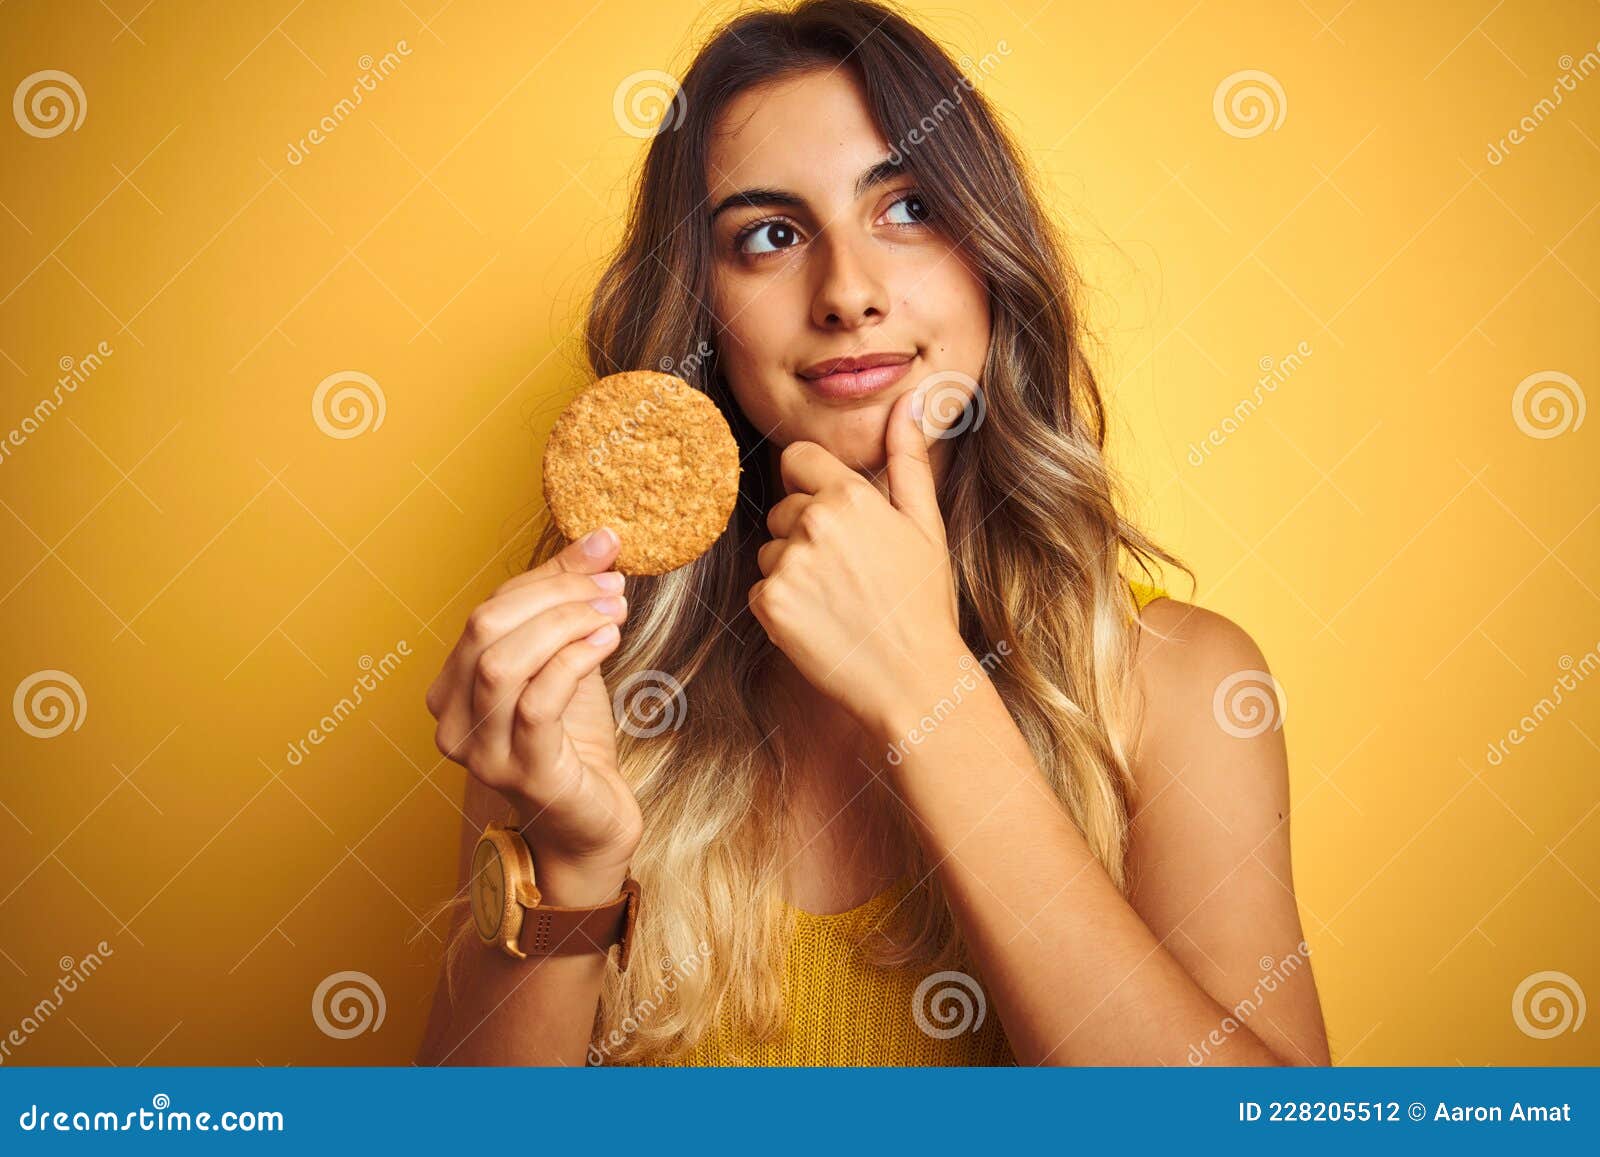 young beautiful woman eating biscuit over grey  background serious face thinking about question, very confused idea